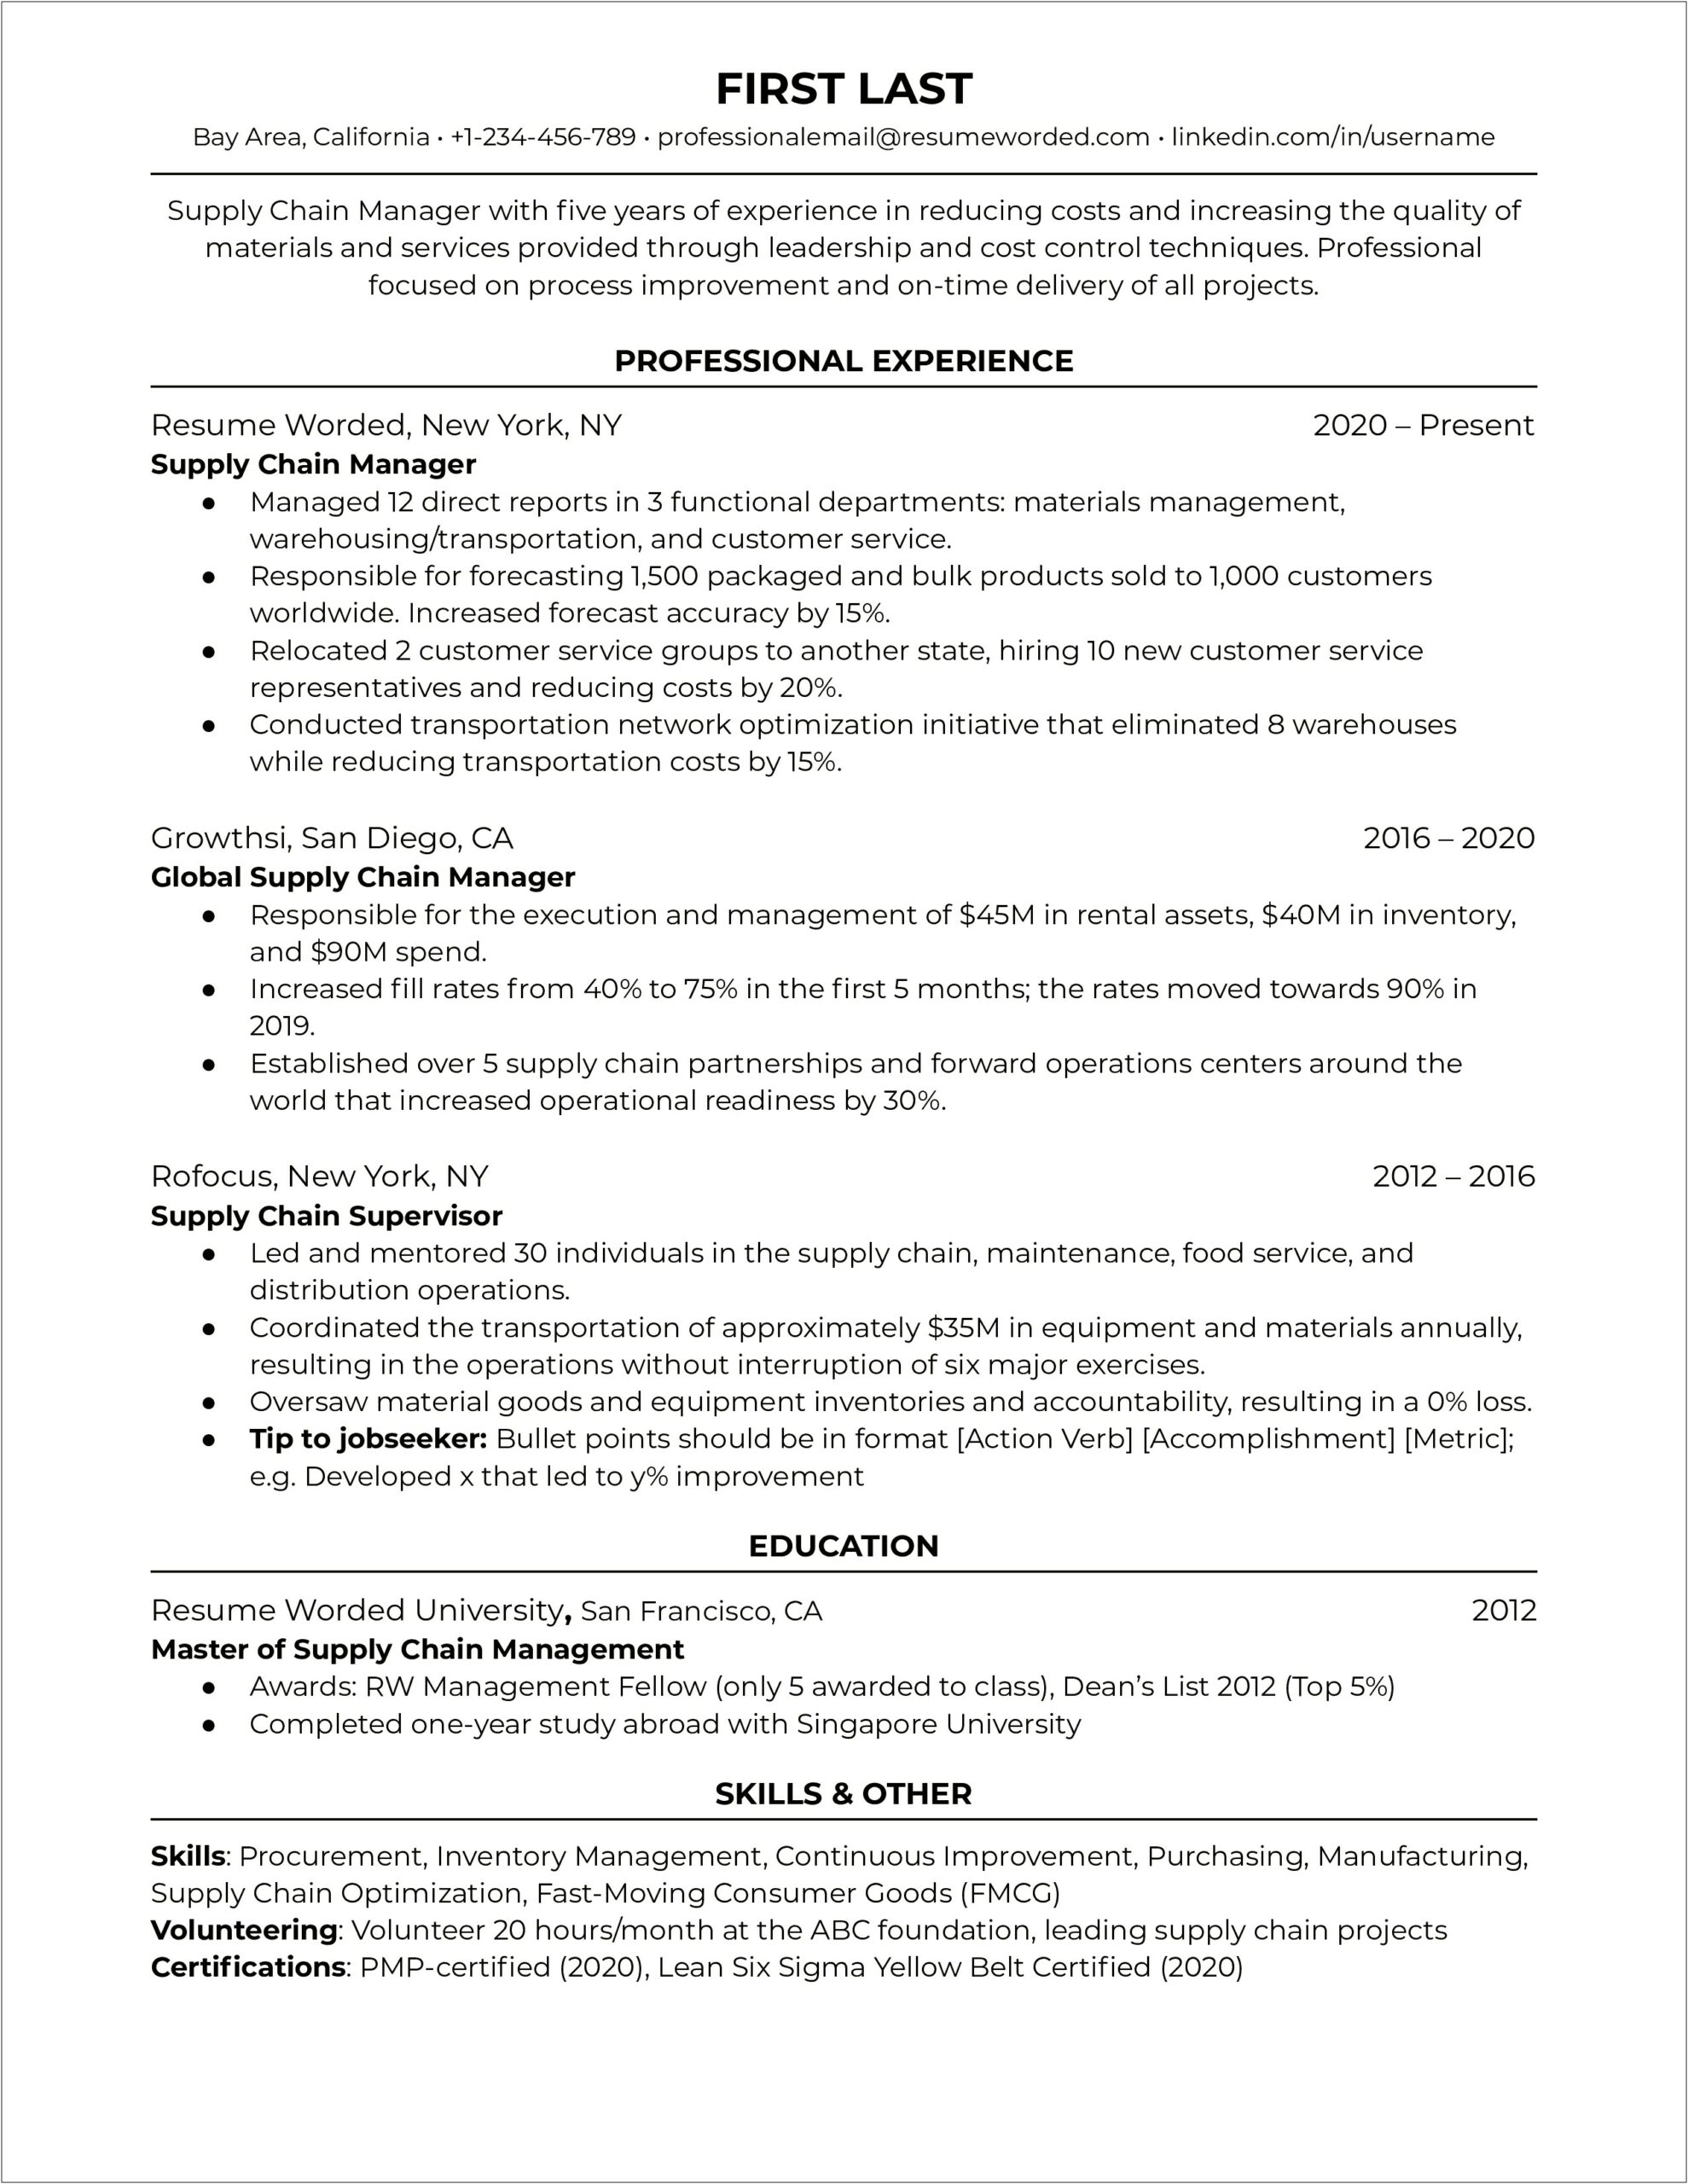 Sample Resume For Inventory Clerk Of Auto Parts